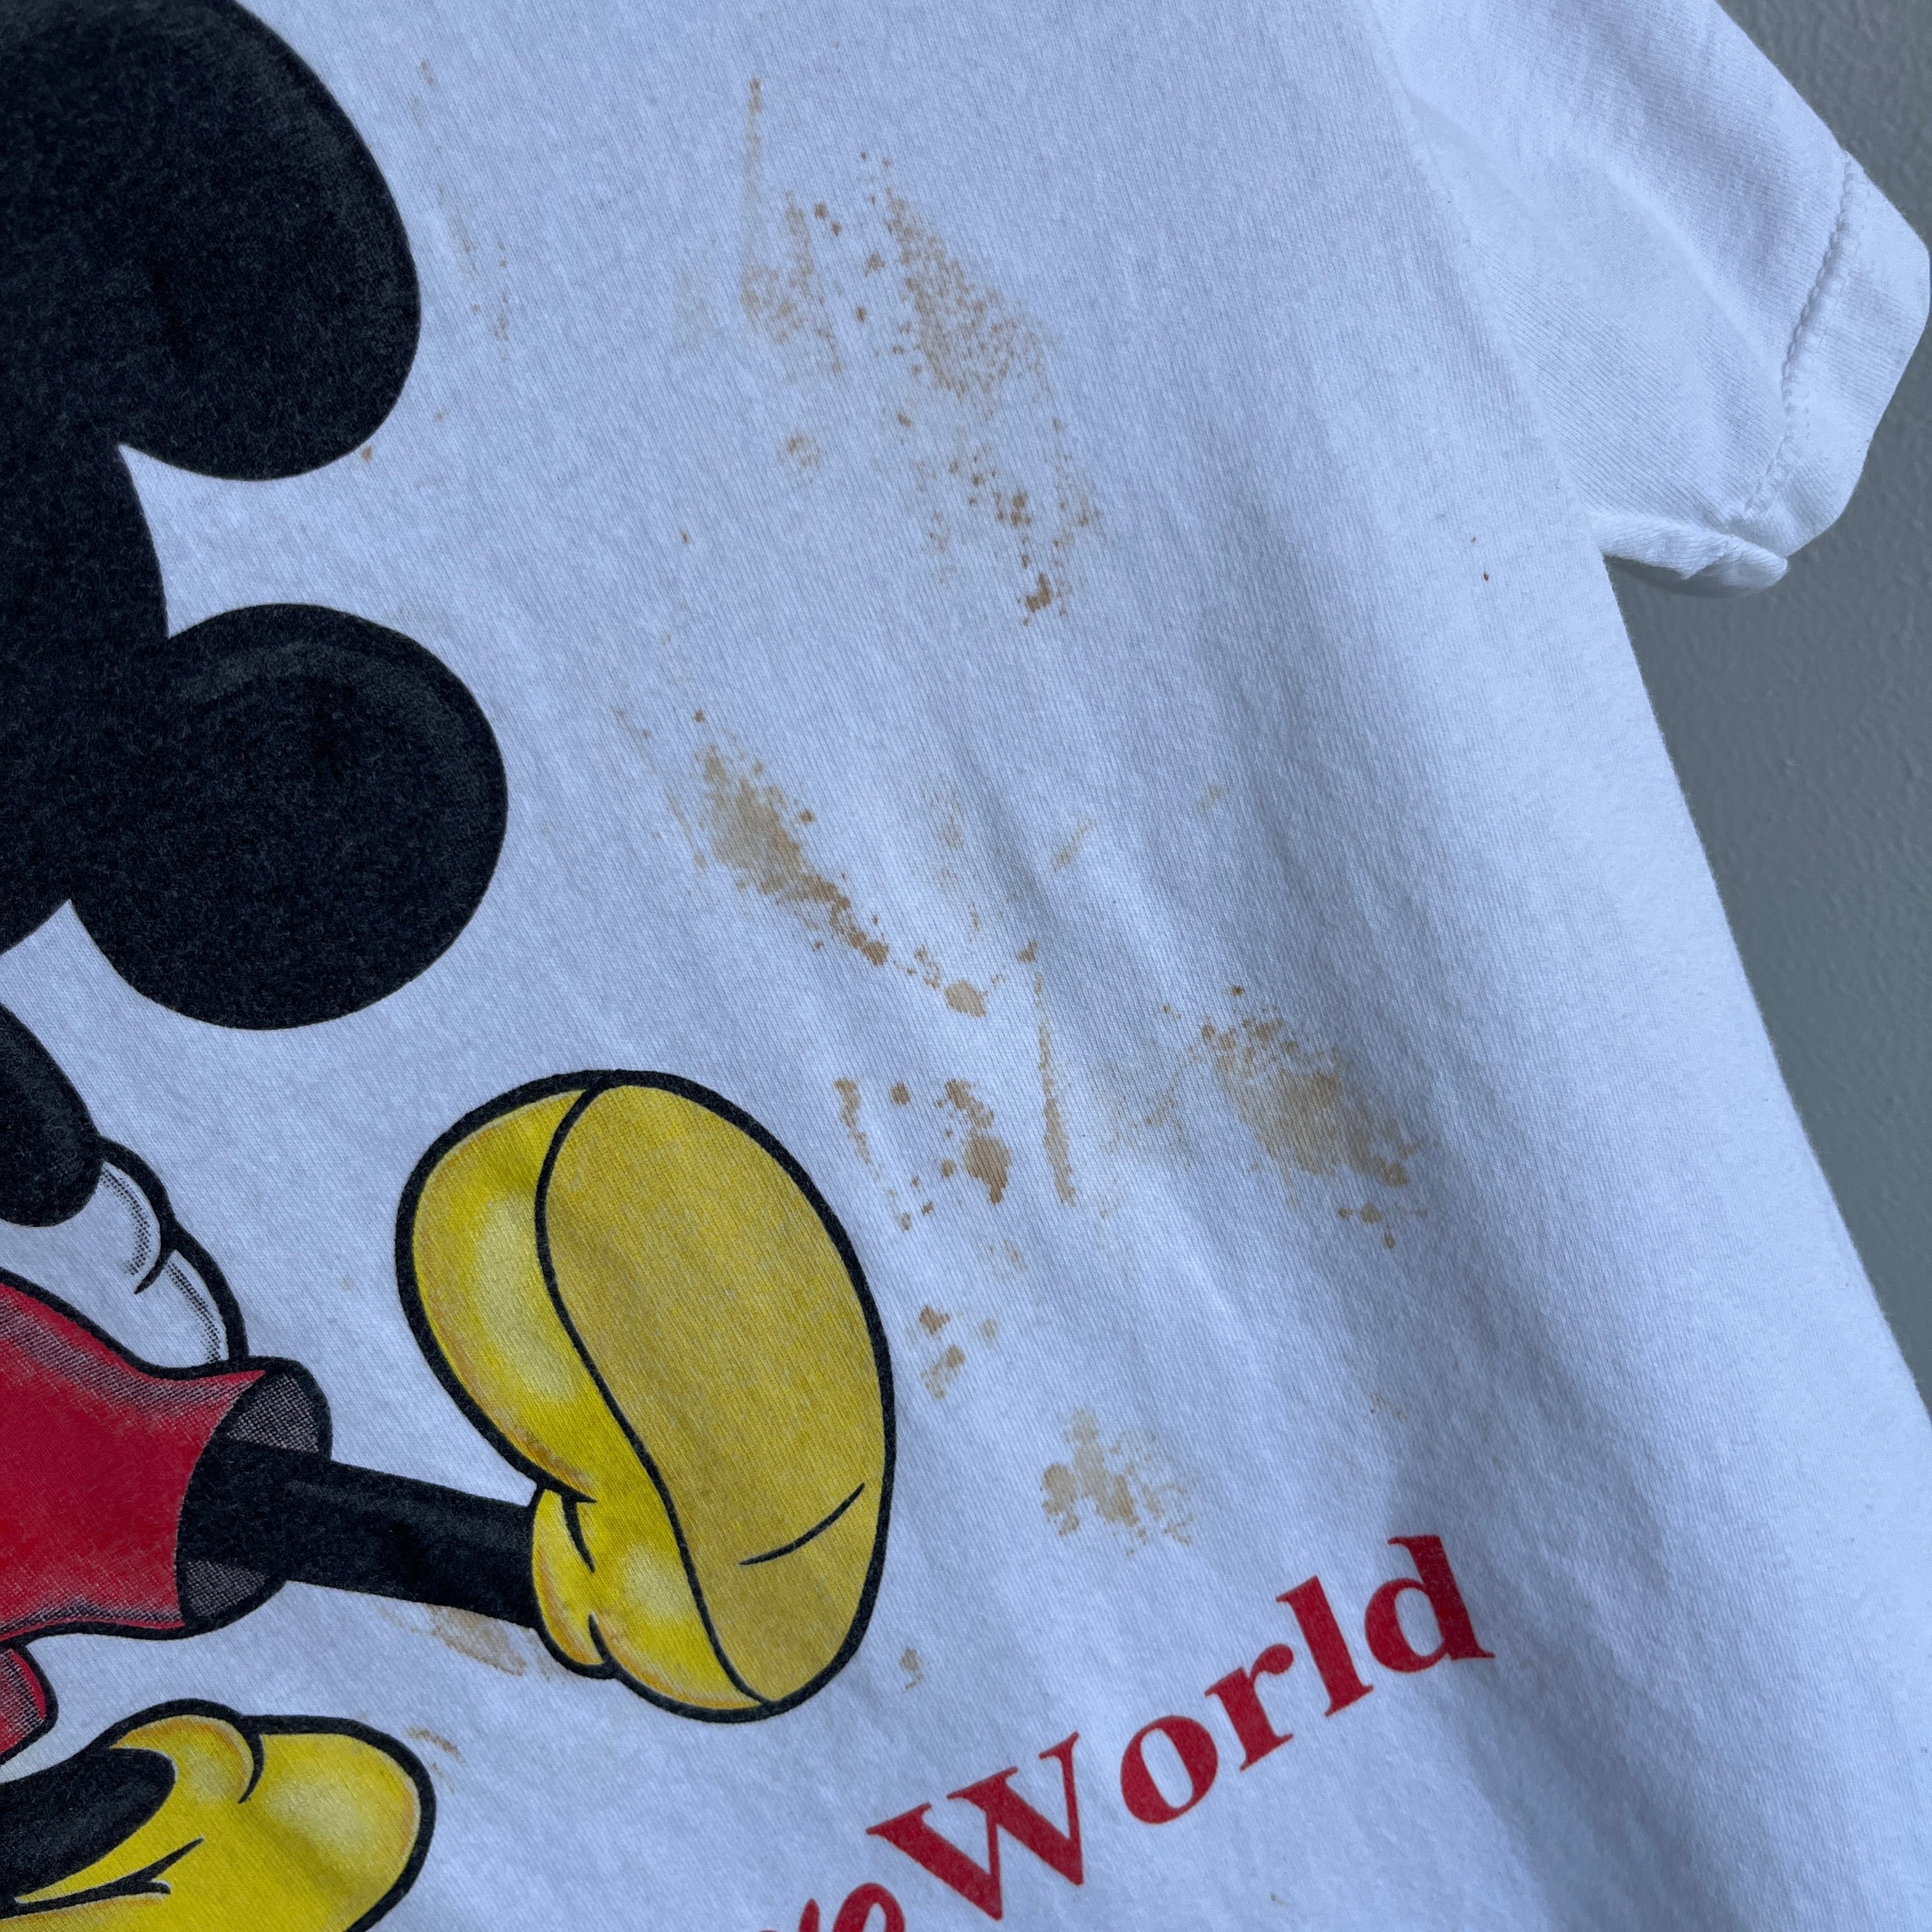 1980/90s Rust Stained Mickey Cotton T-Shirt